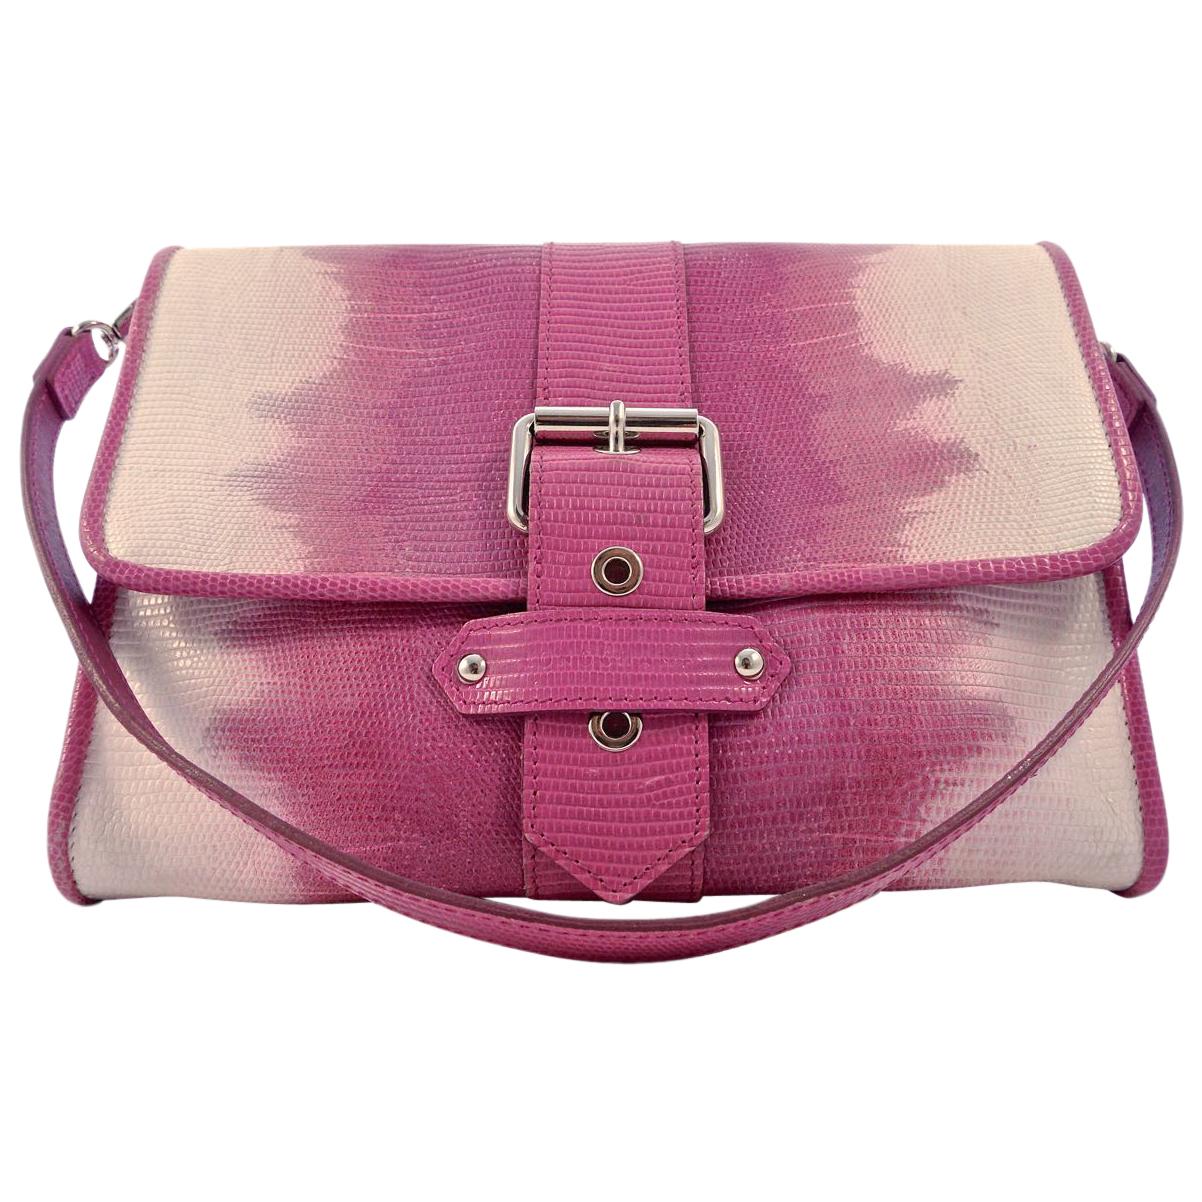 Kate Moss for Longchamp Leather Snake Effect Pink and White Clutch 